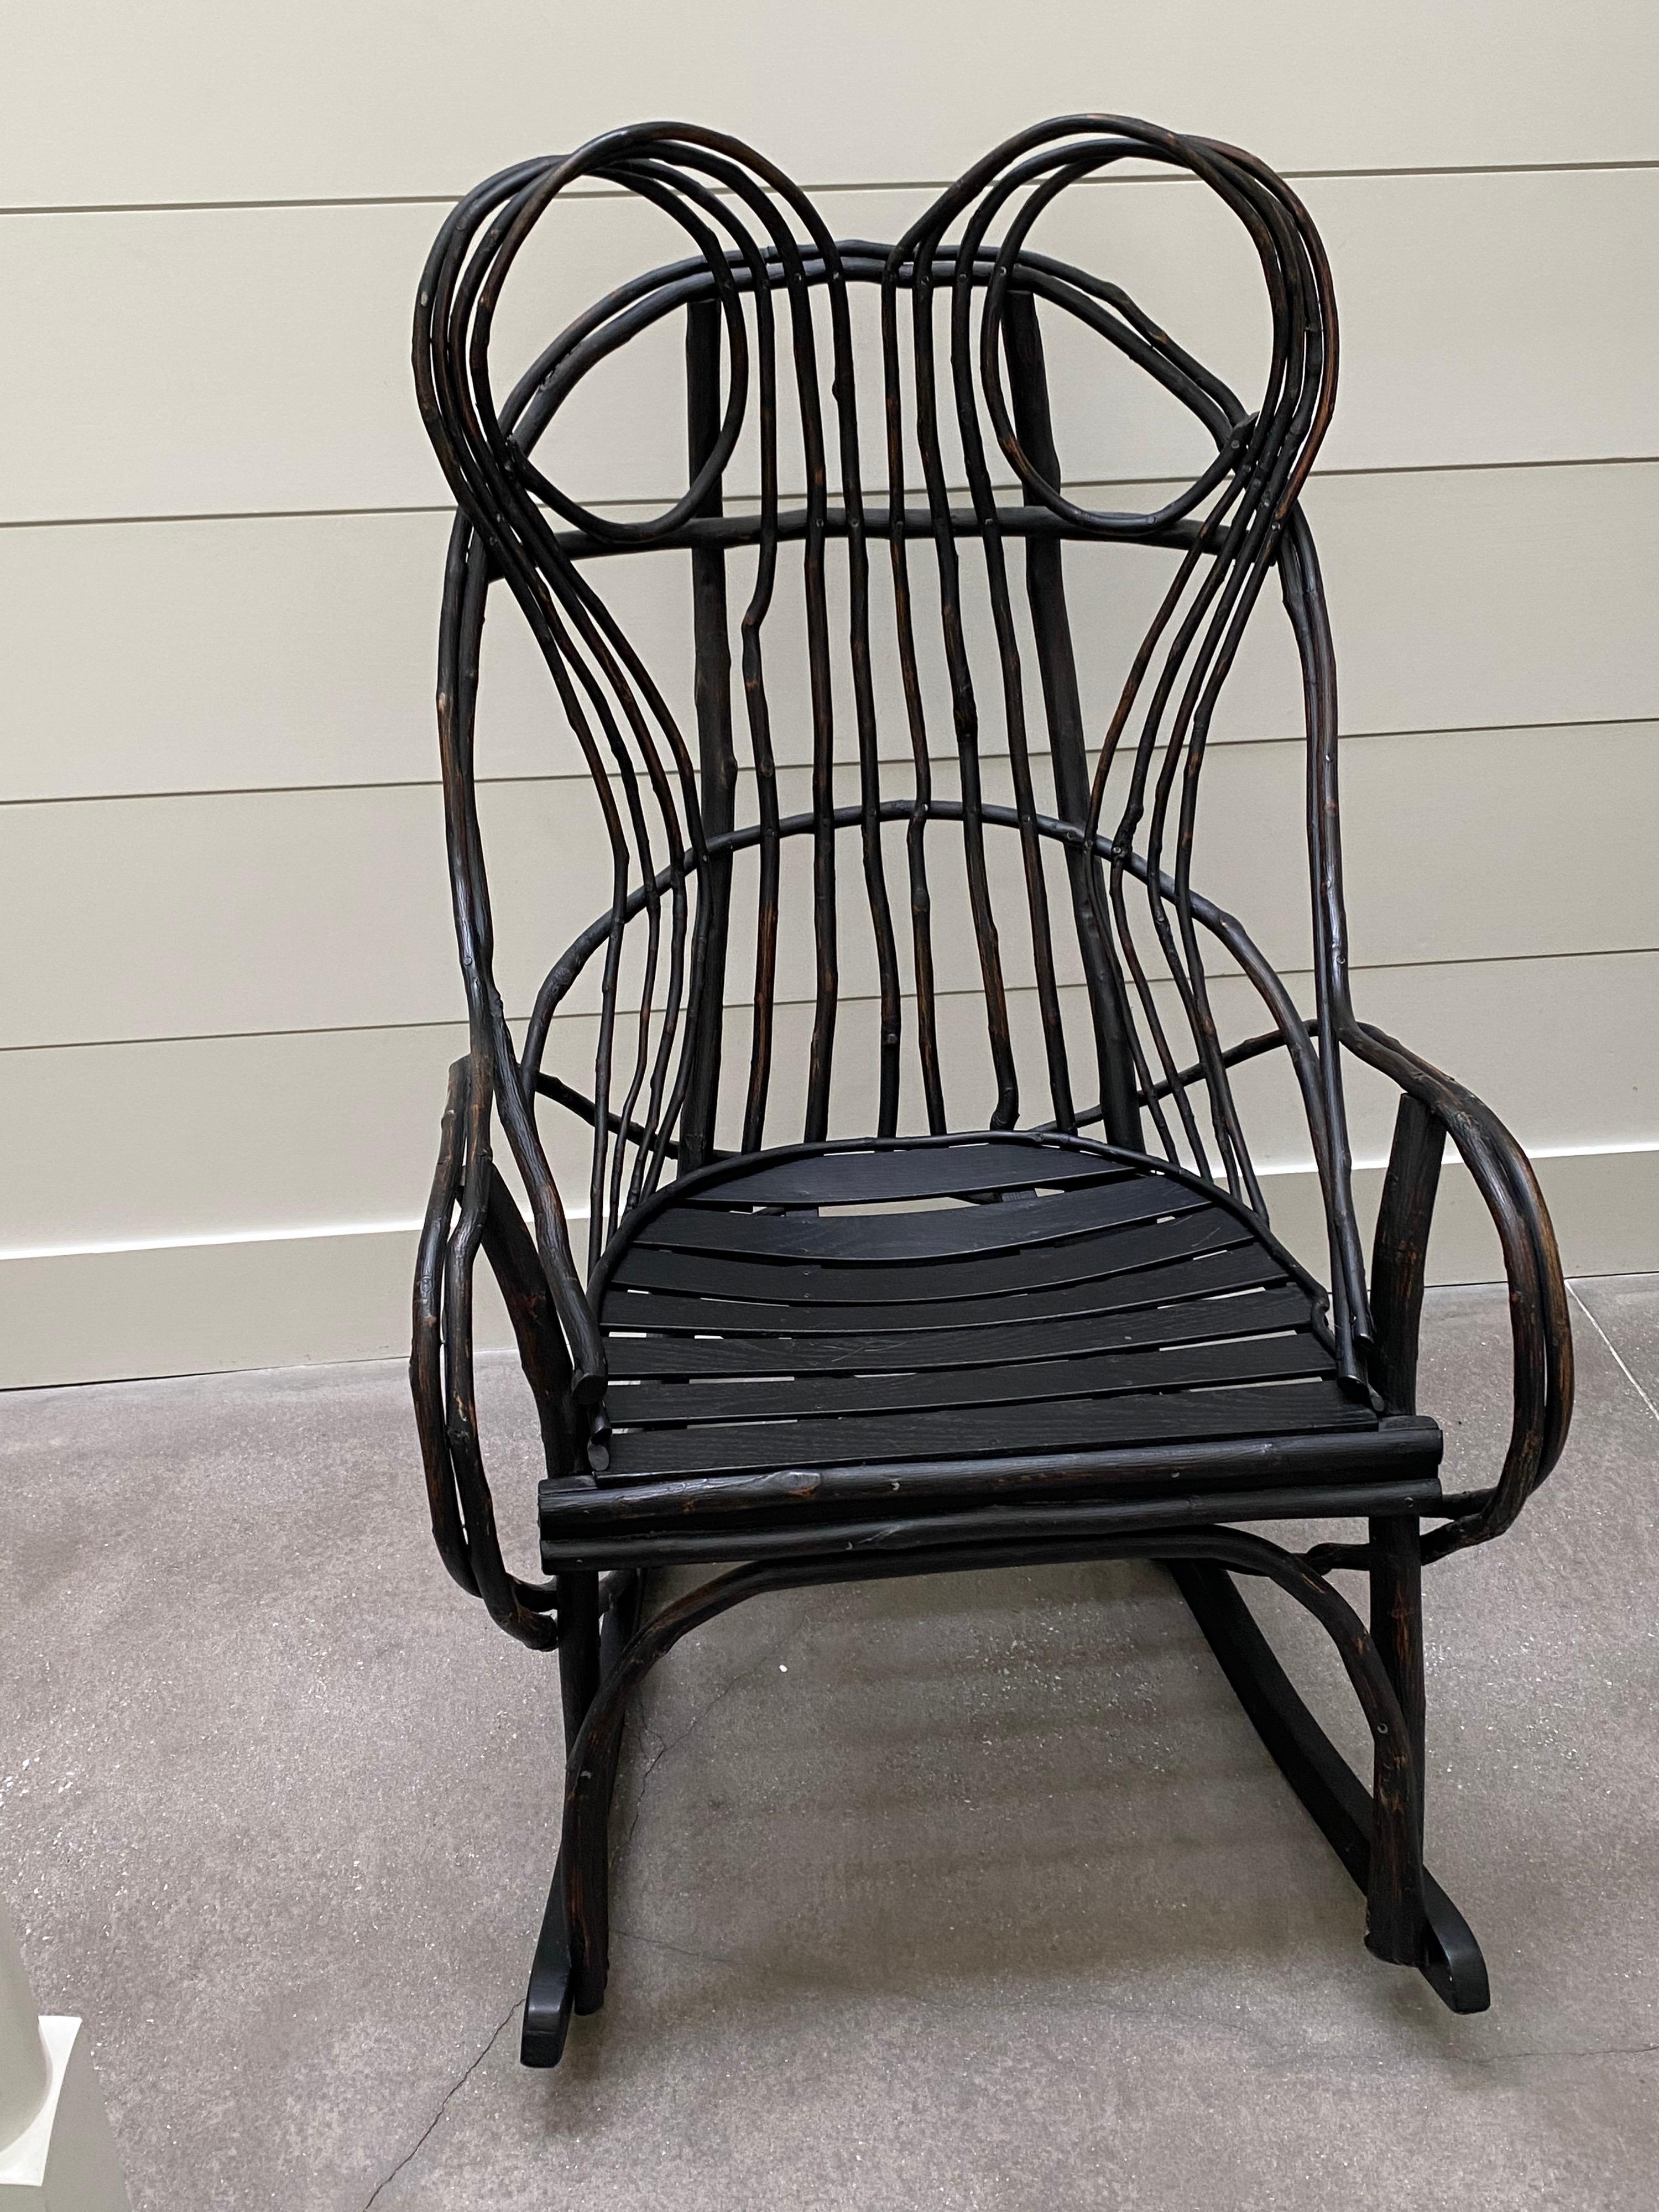 American painted Adirondack twig rocking chair, custom made in the Adirondacks, New York, in the past 20 years. Painted in cool modern black. Light wear to arms mainly.
Measures: 23” arm height
43.5” high x 22.5” wide x 31” deep 
22” seat